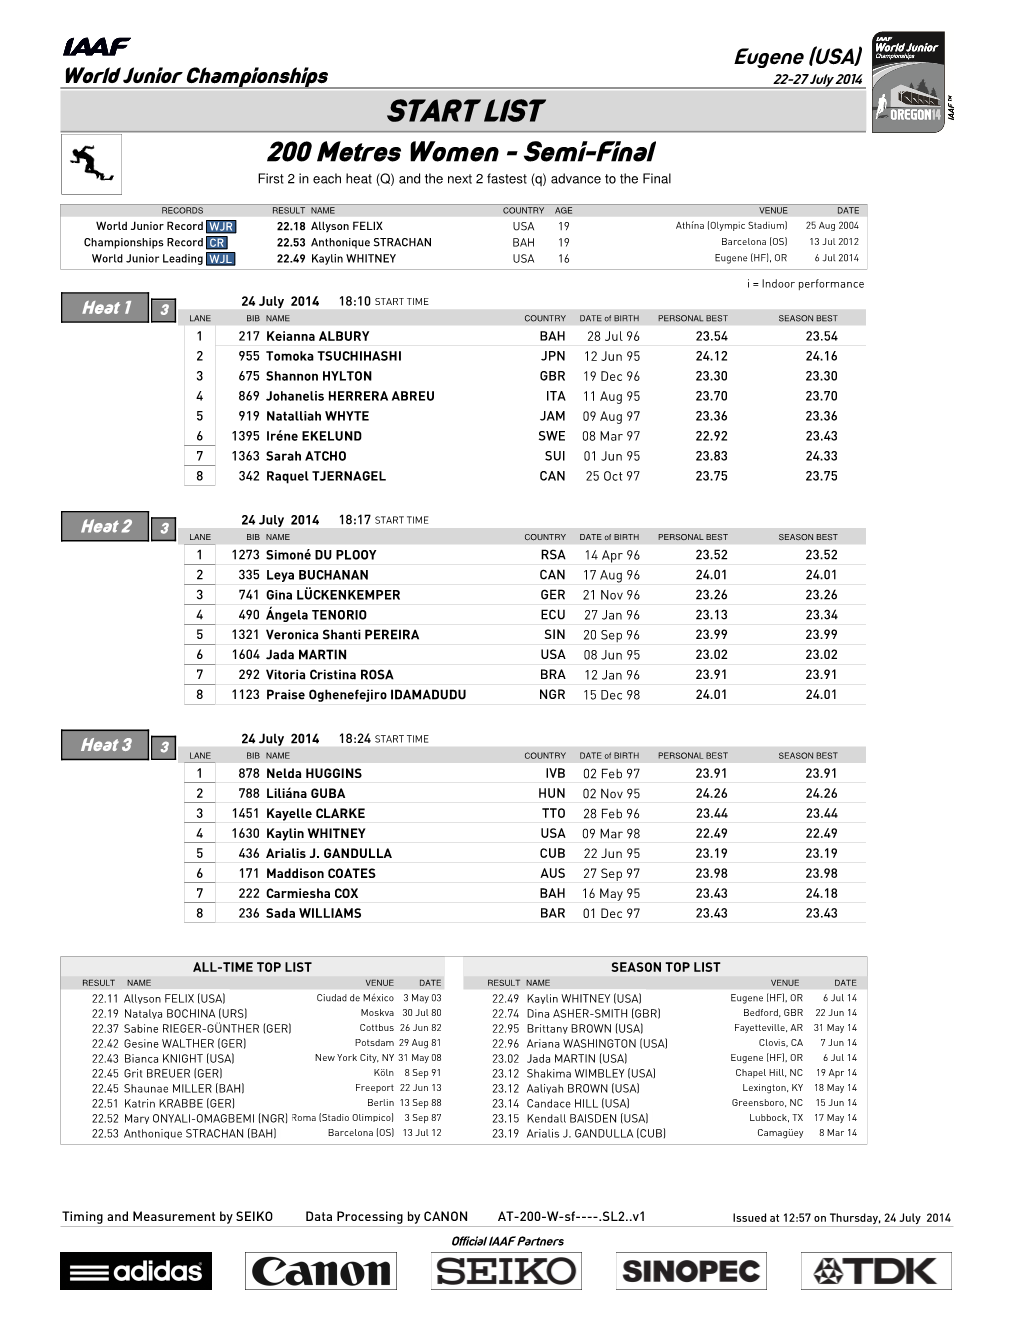 START LIST 200 Metres Women - Semi-Final First 2 in Each Heat (Q) and the Next 2 Fastest (Q) Advance to the Final